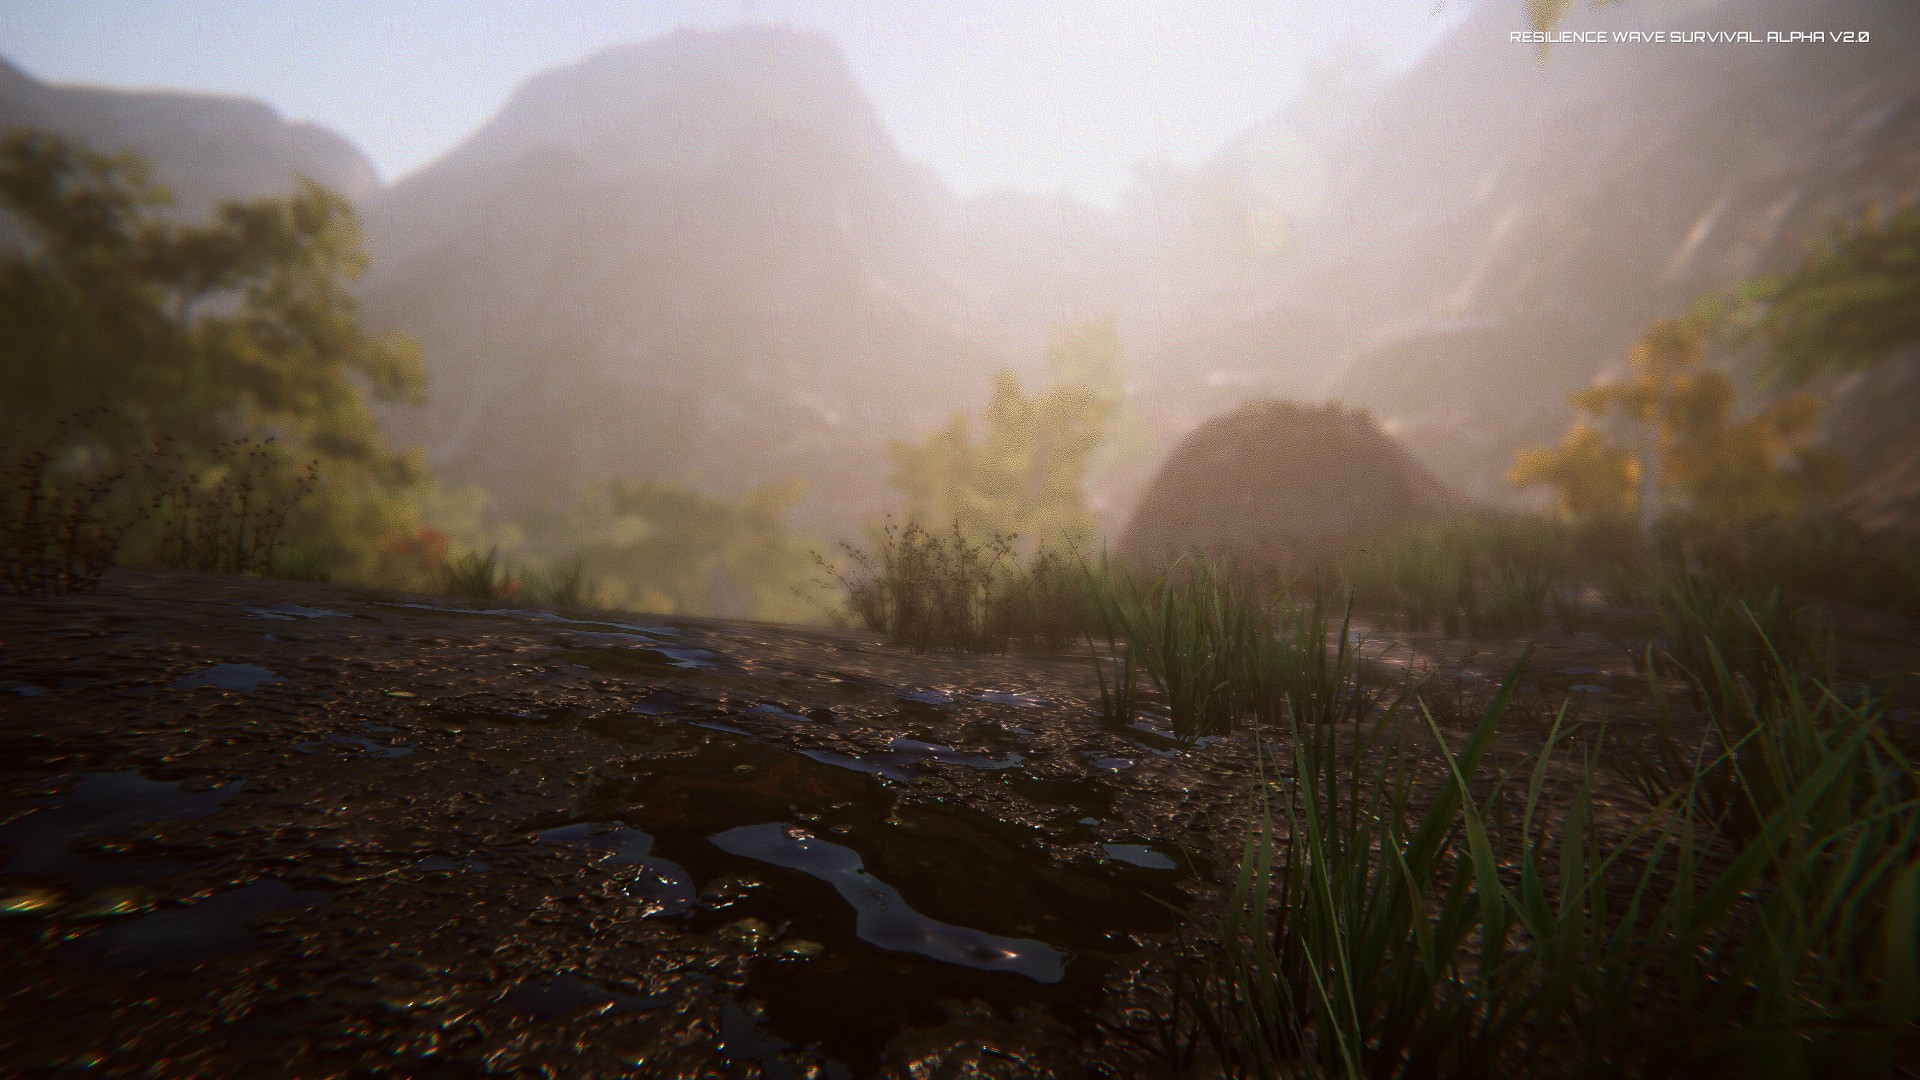 Resilience Wave Survival screenshot